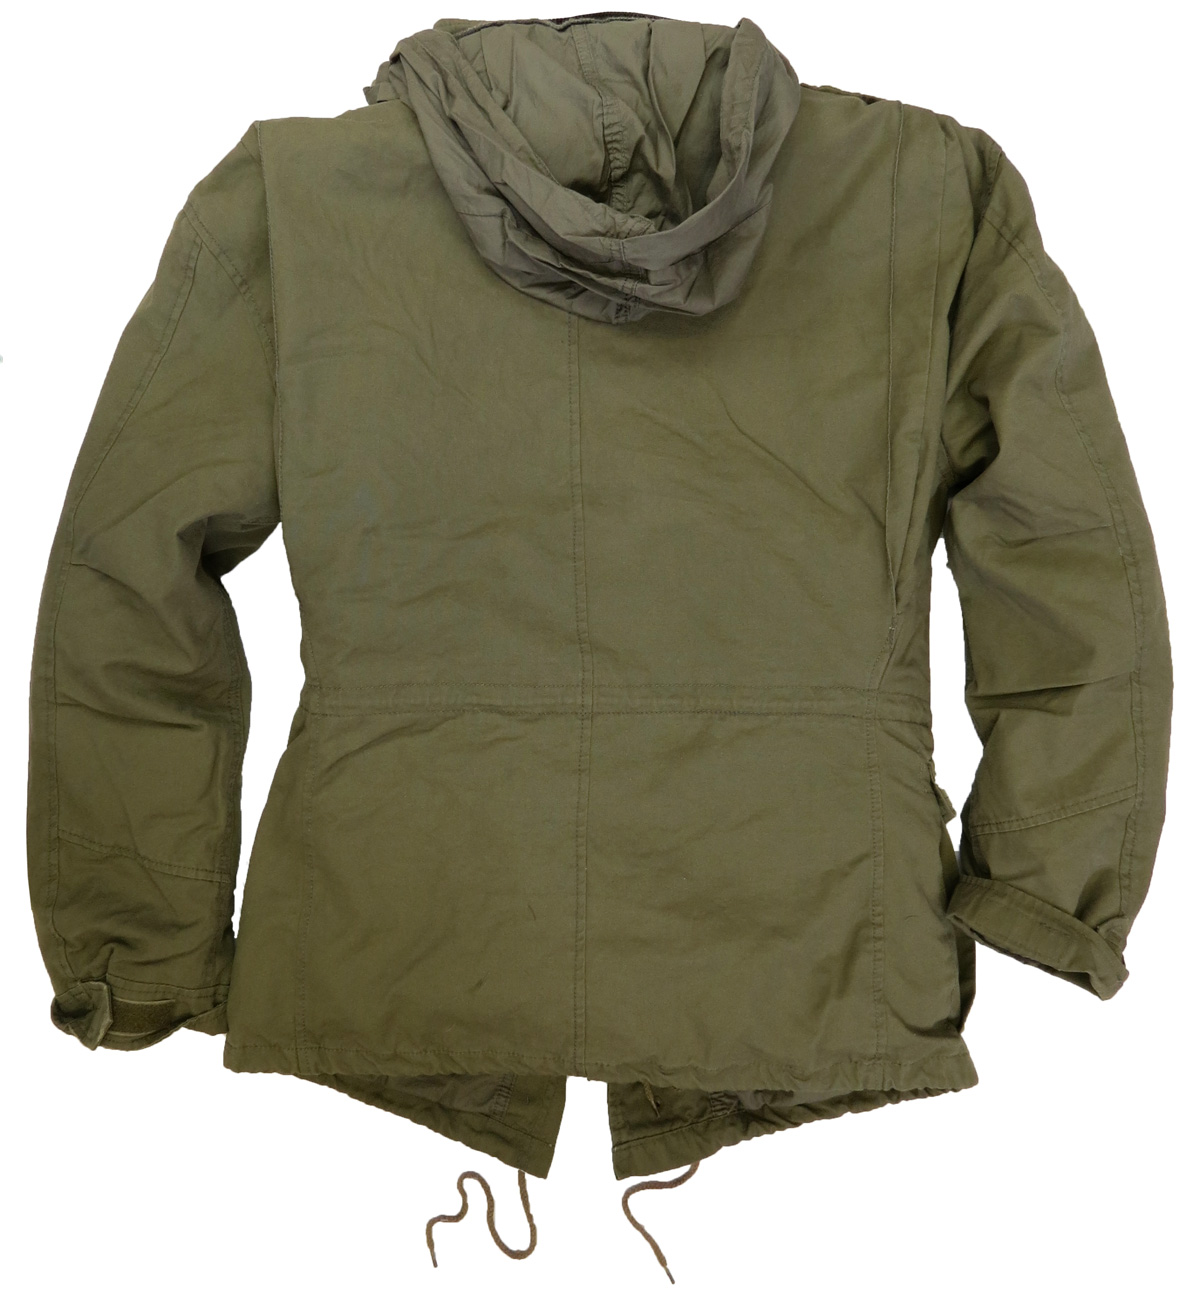 M65 Infantry Jacket by Mean and Green